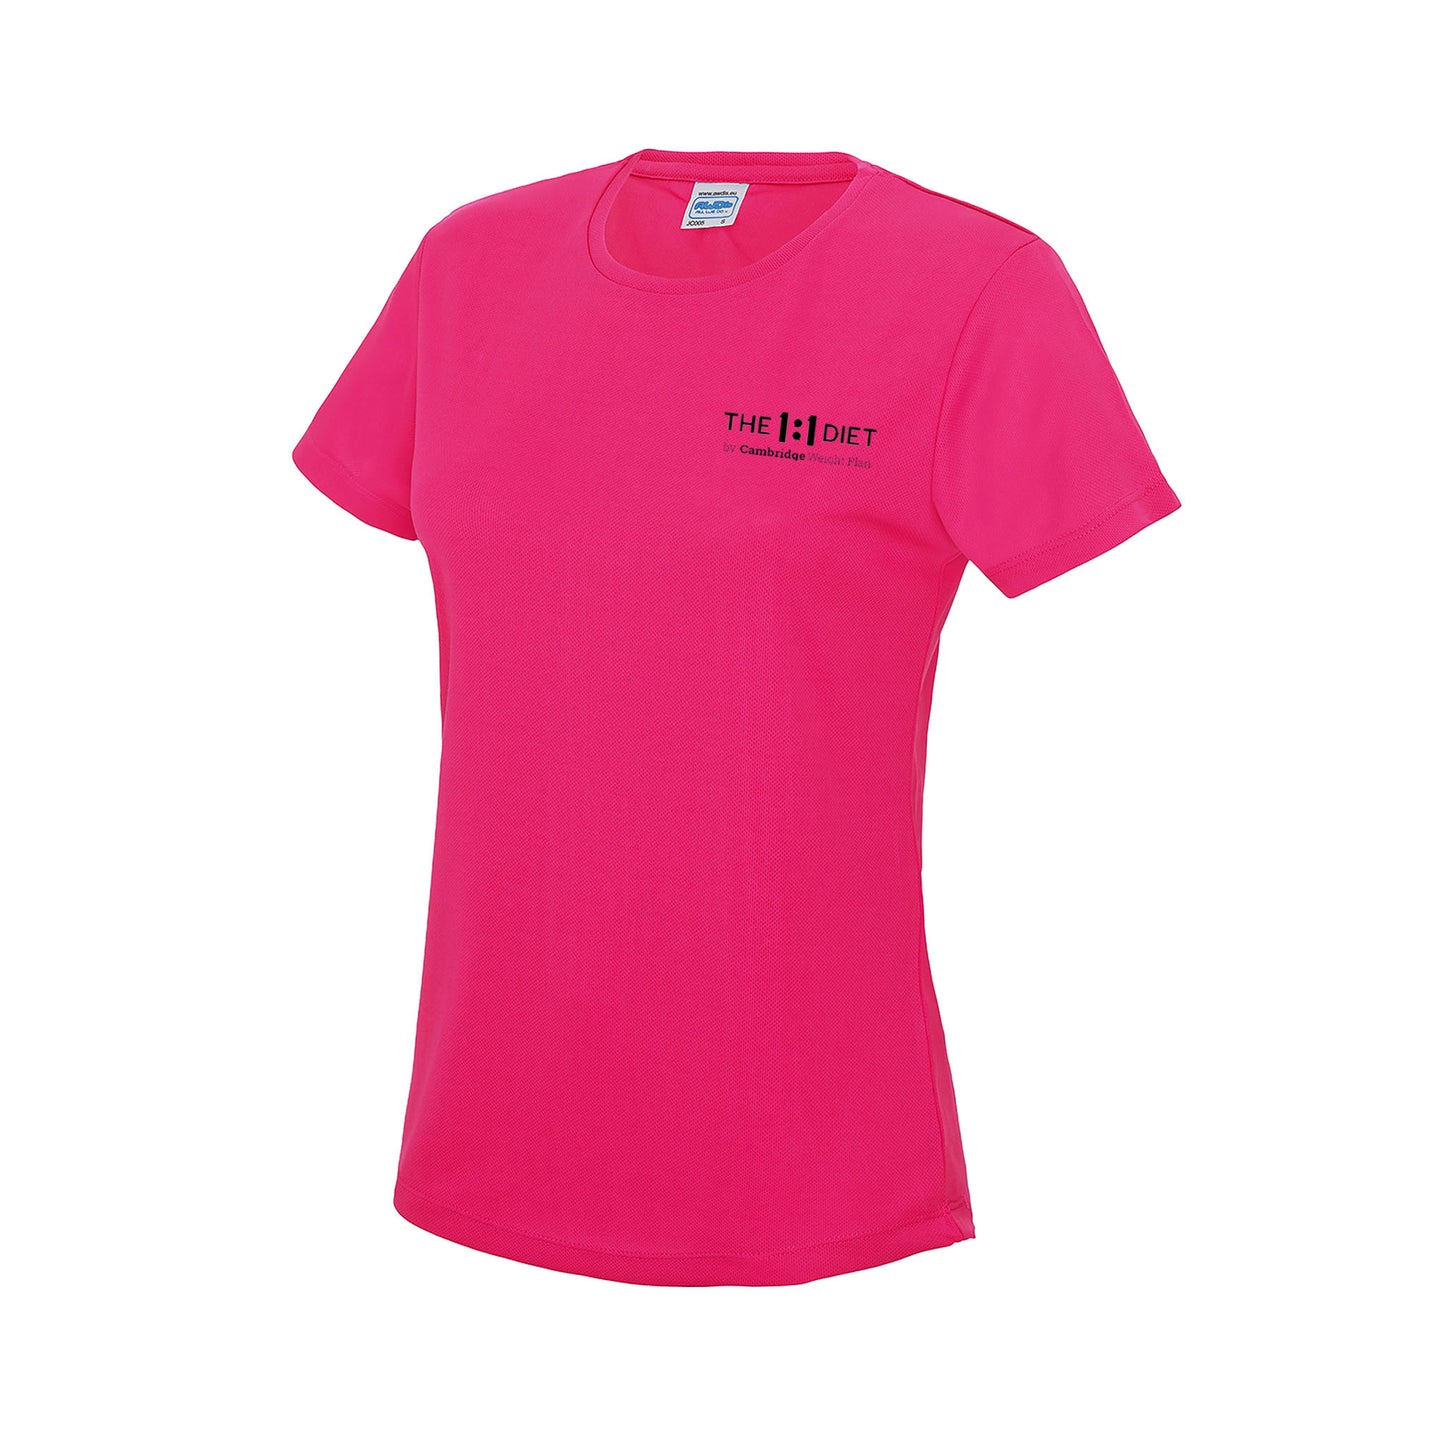 The 1:1 Diet - Ladies Breathable Gym T-Shirt – Customique